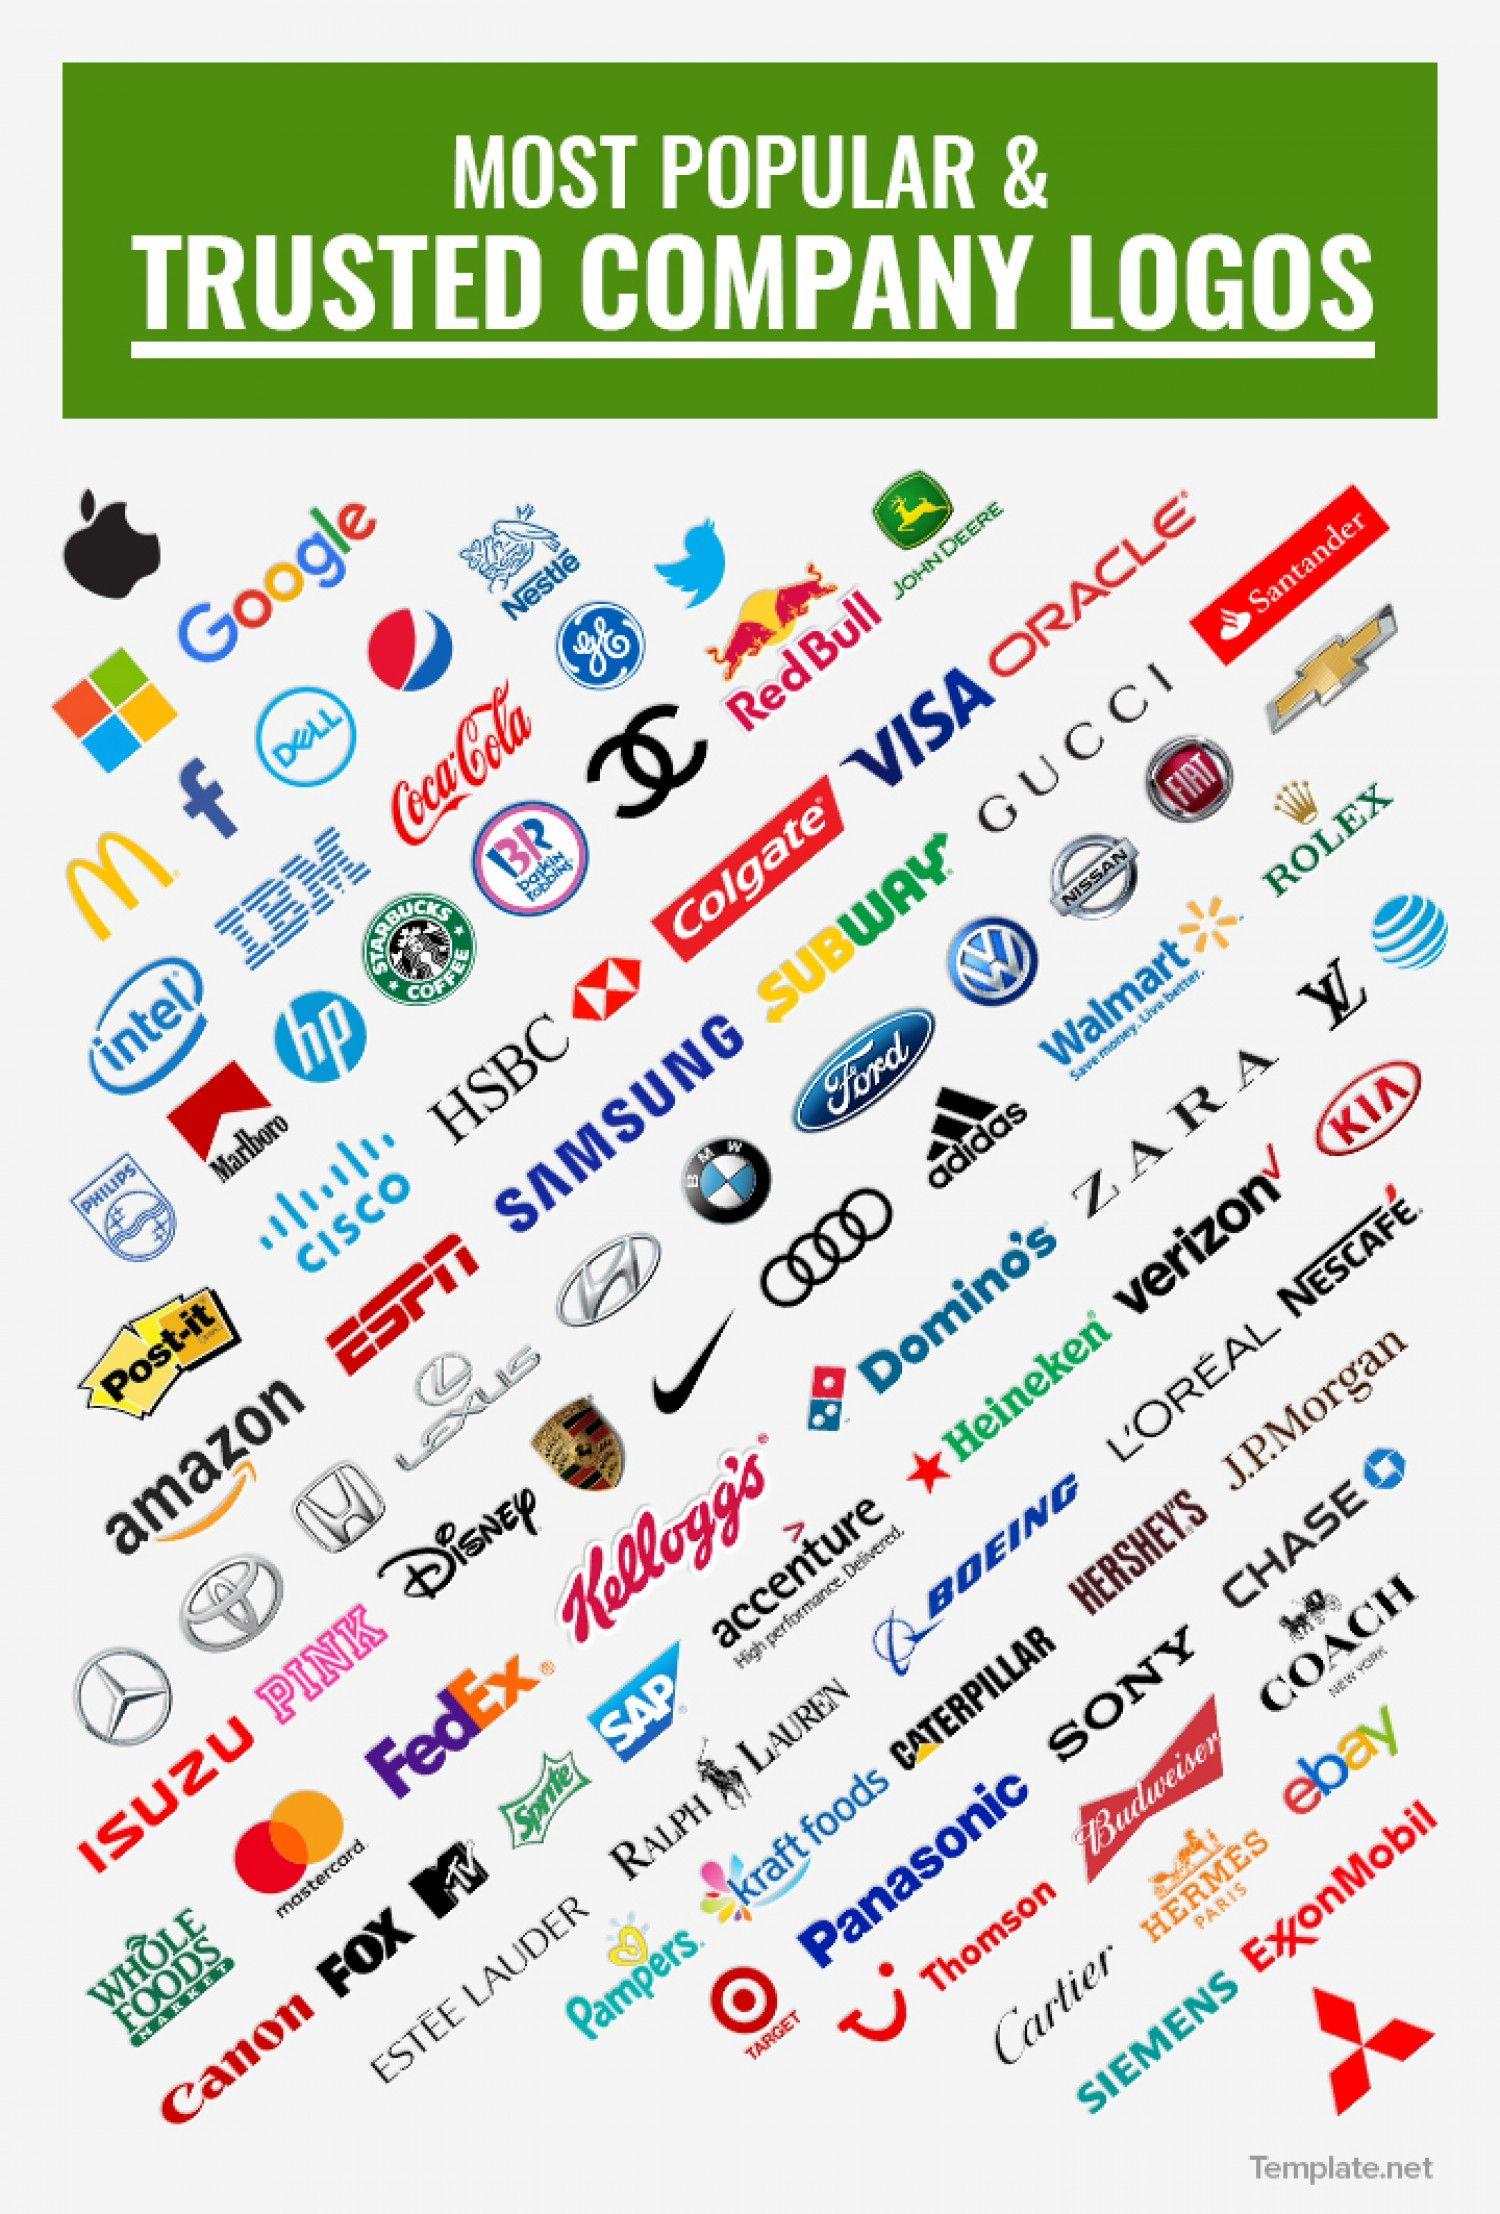 Most Famous Company Logo - All about Famous Logos Design Amp History Of World Famous Company ...